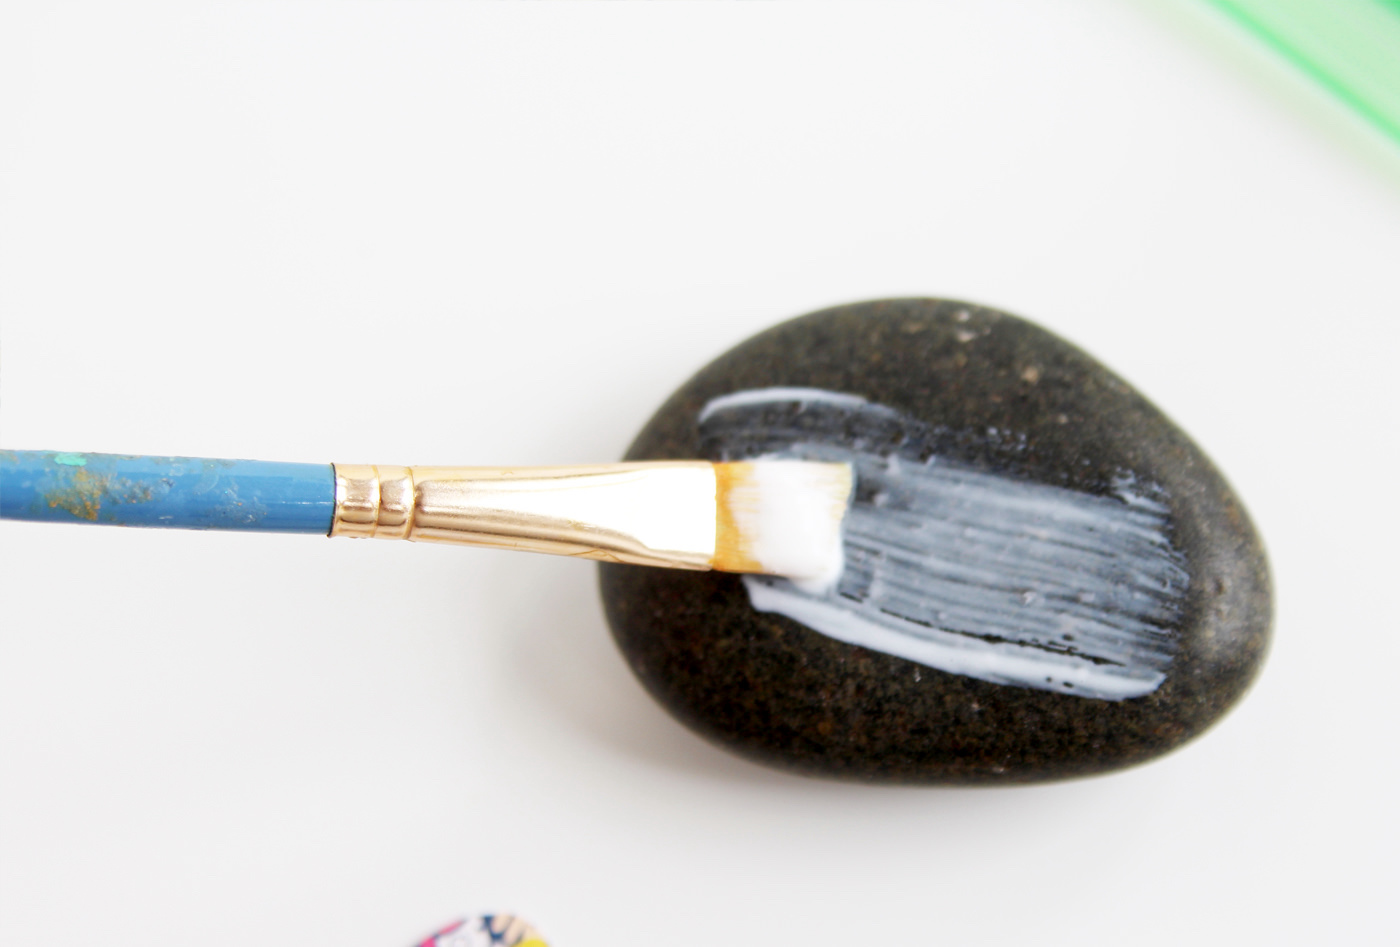 Applying a thin layer of Mod Podge to a rock with a paintbrush